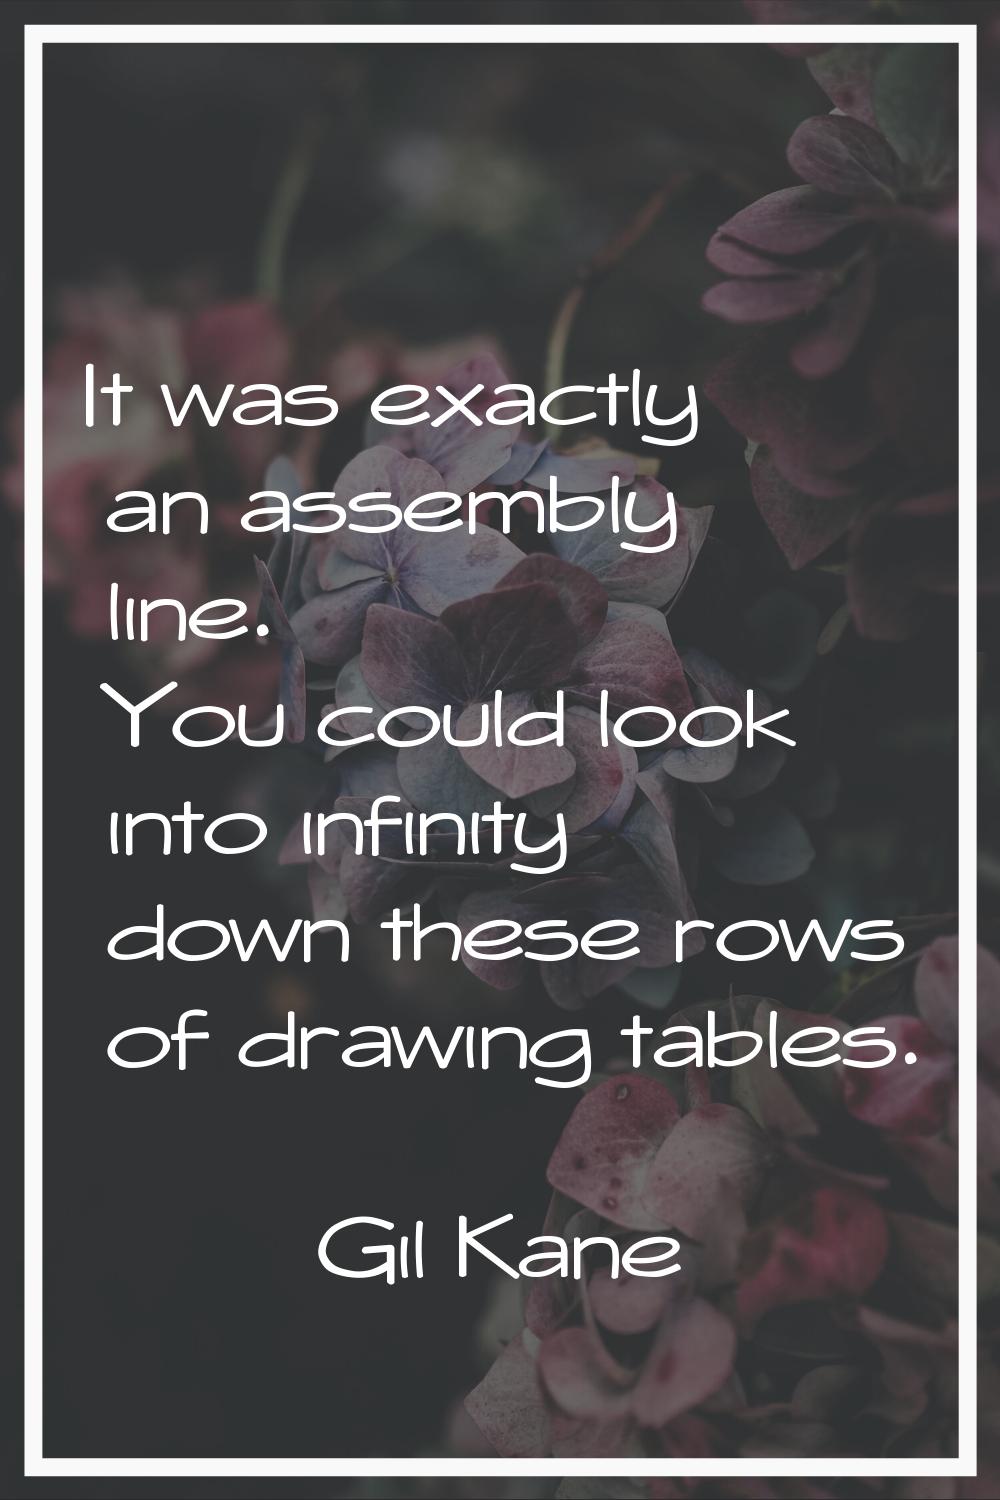 It was exactly an assembly line. You could look into infinity down these rows of drawing tables.